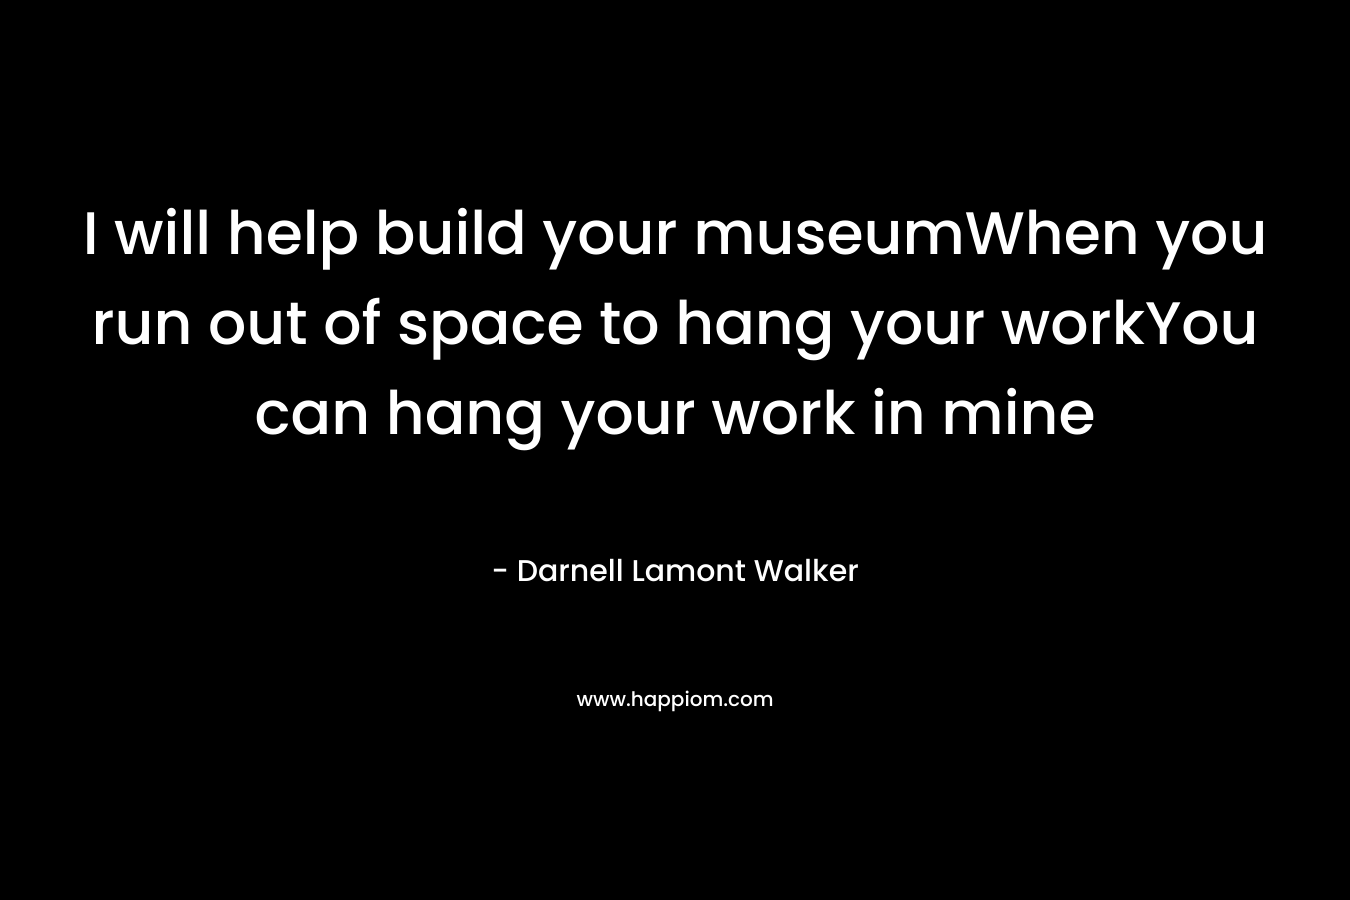 I will help build your museumWhen you run out of space to hang your workYou can hang your work in mine